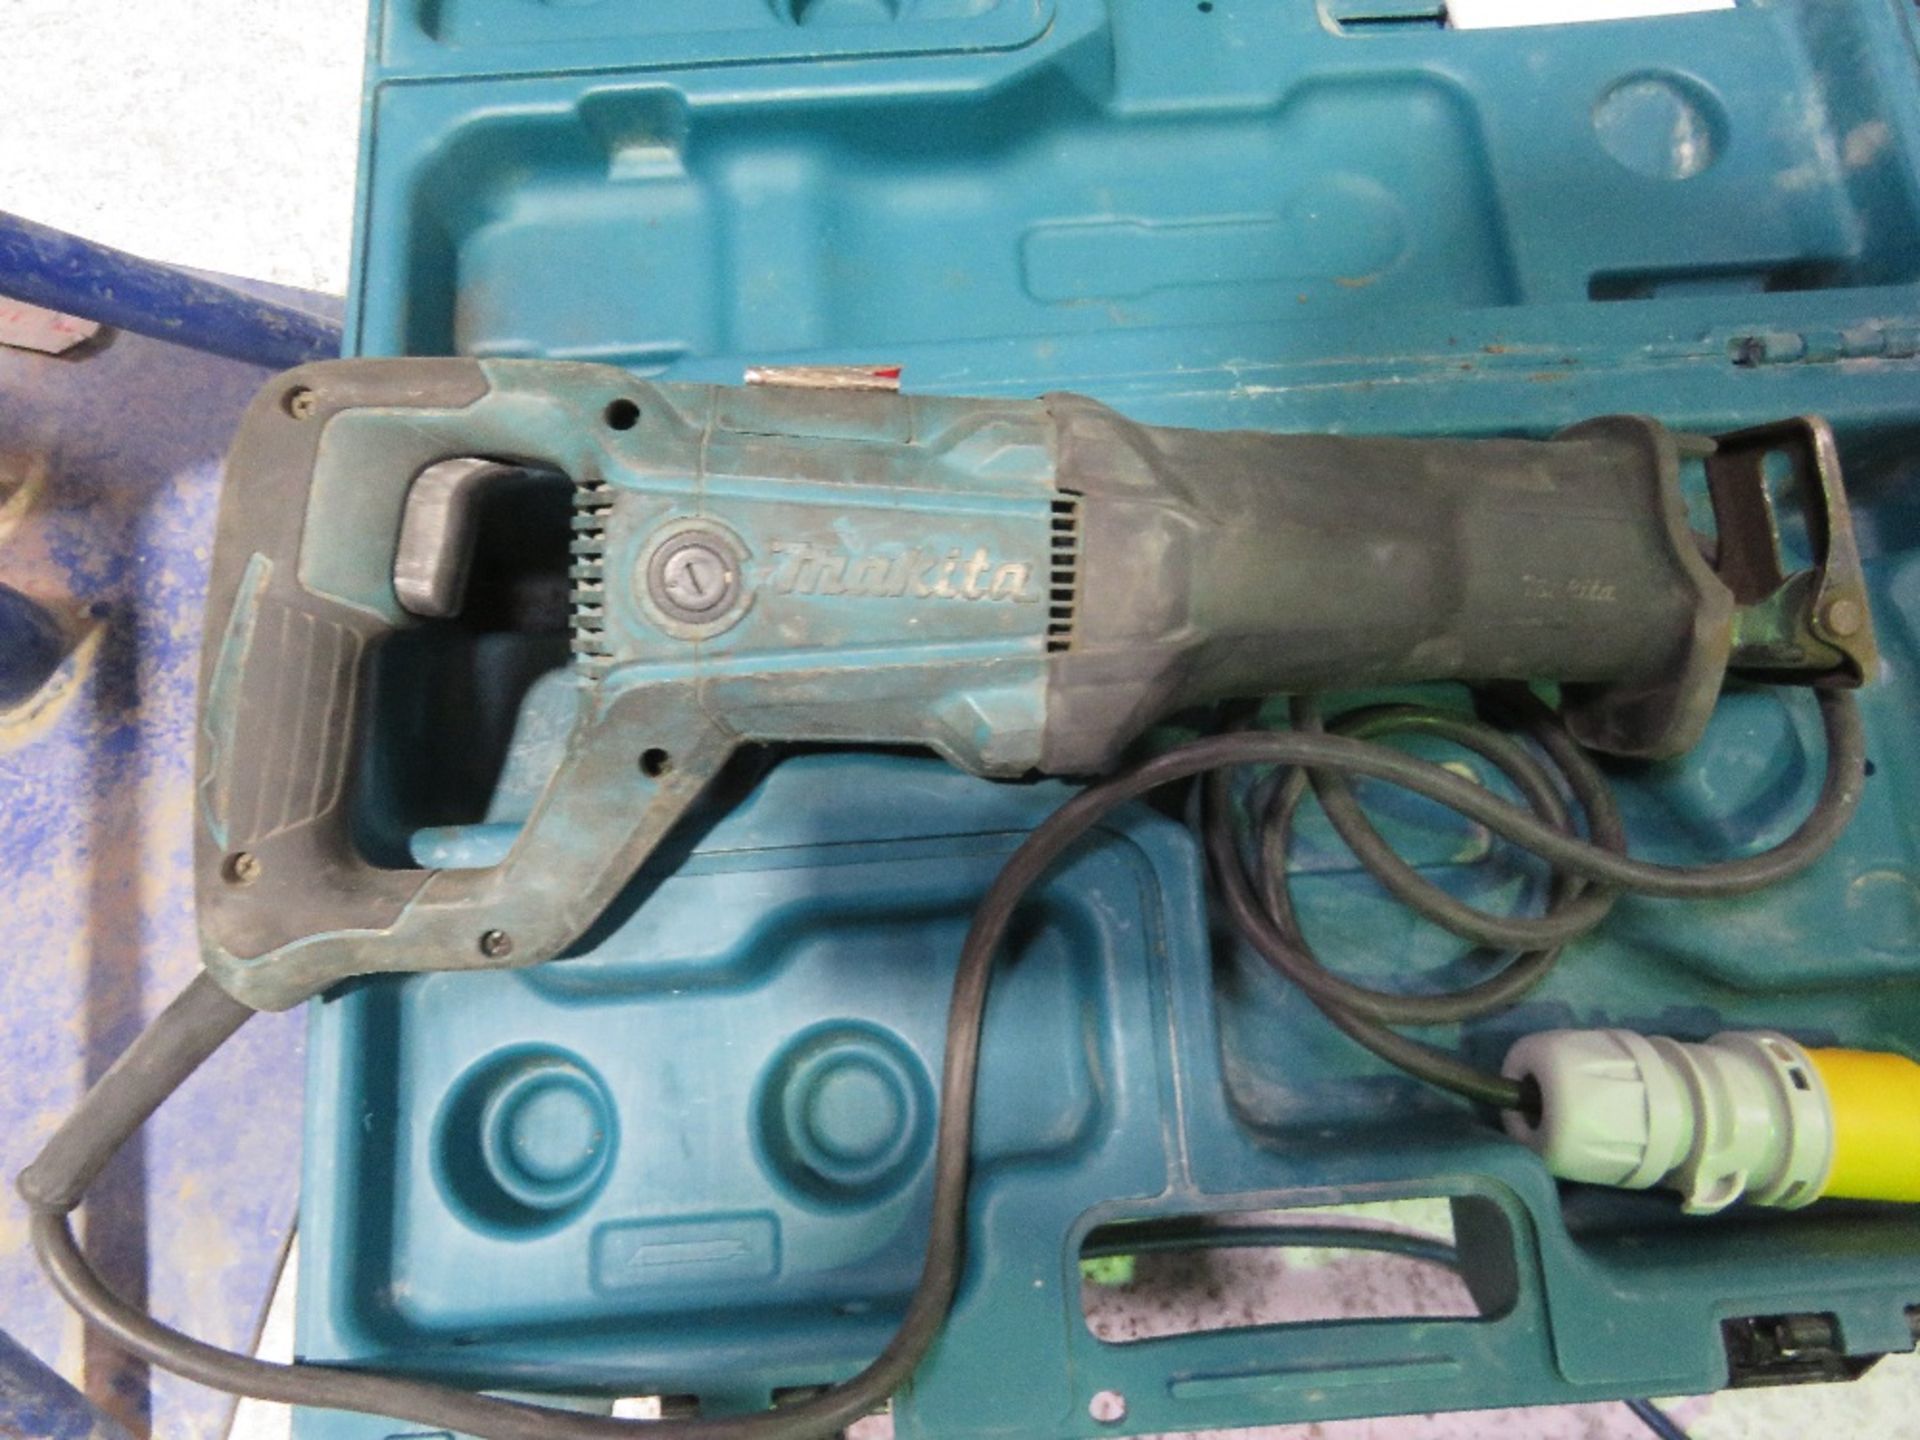 2 X MAKITA 110VOLT POWERED RECIPROCATING SAWS IN CASES THX13911,13944 - Image 2 of 4